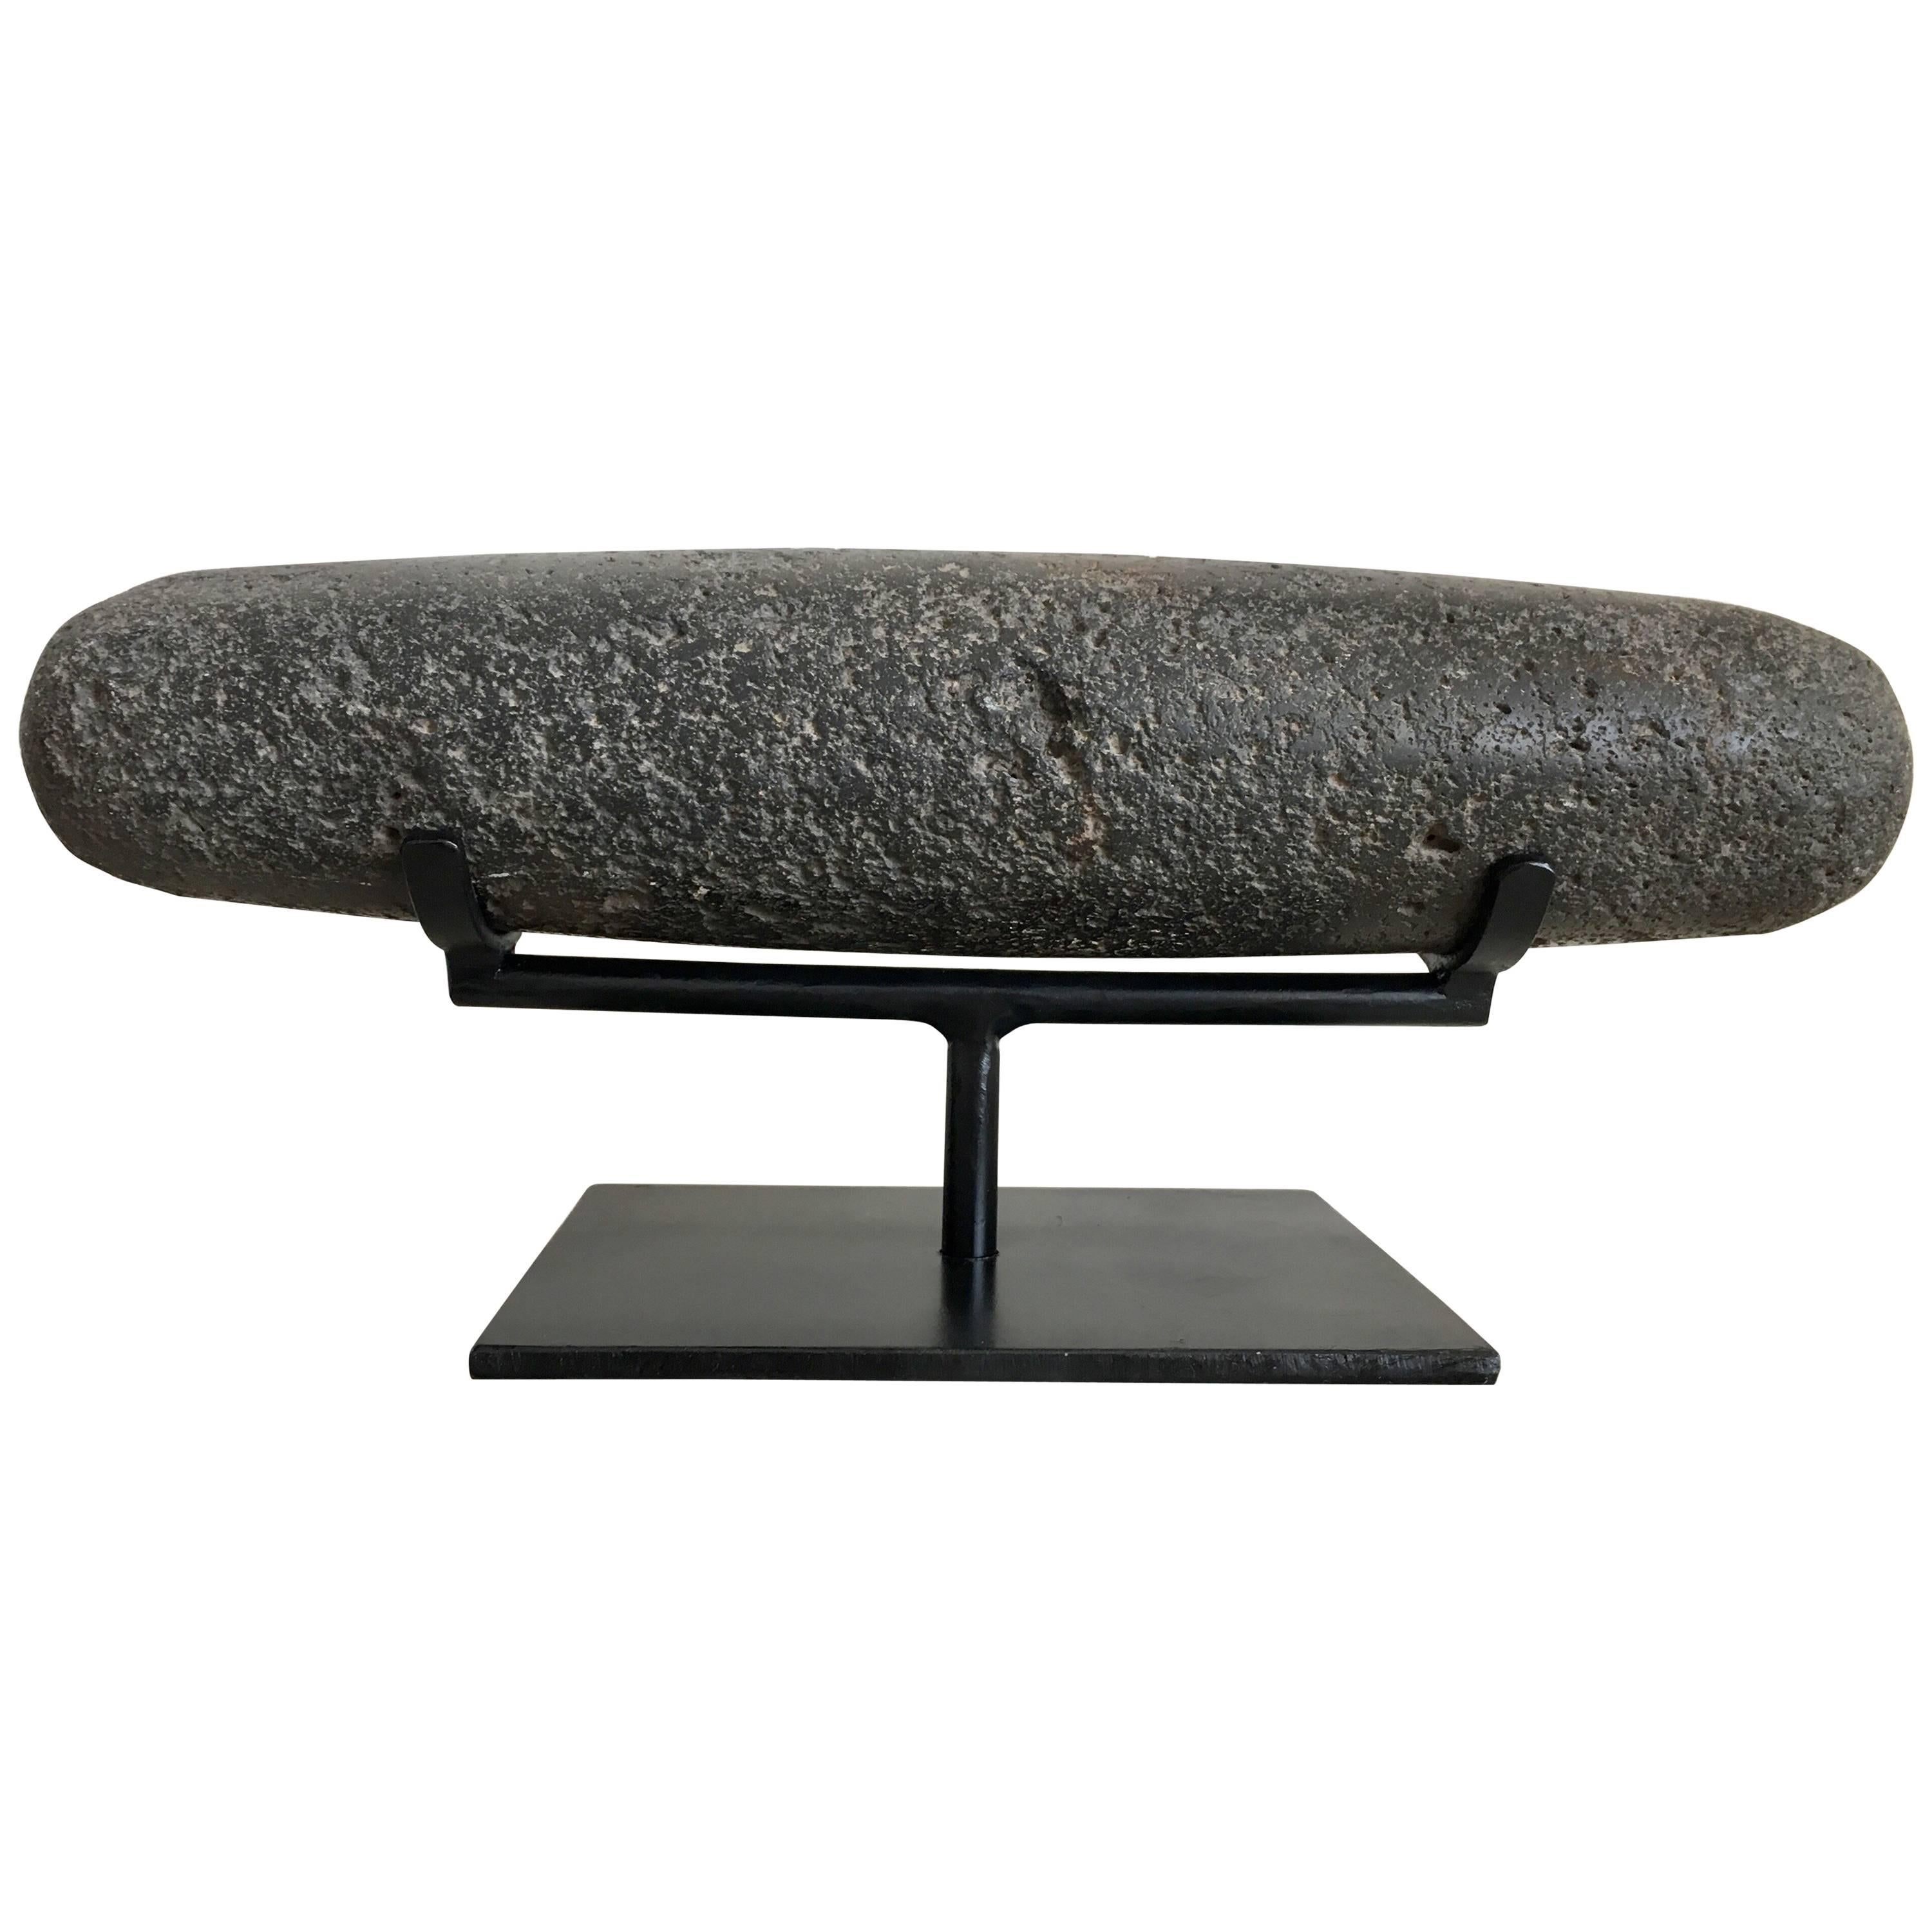 18th Century Volcanic Pestle from Mexico